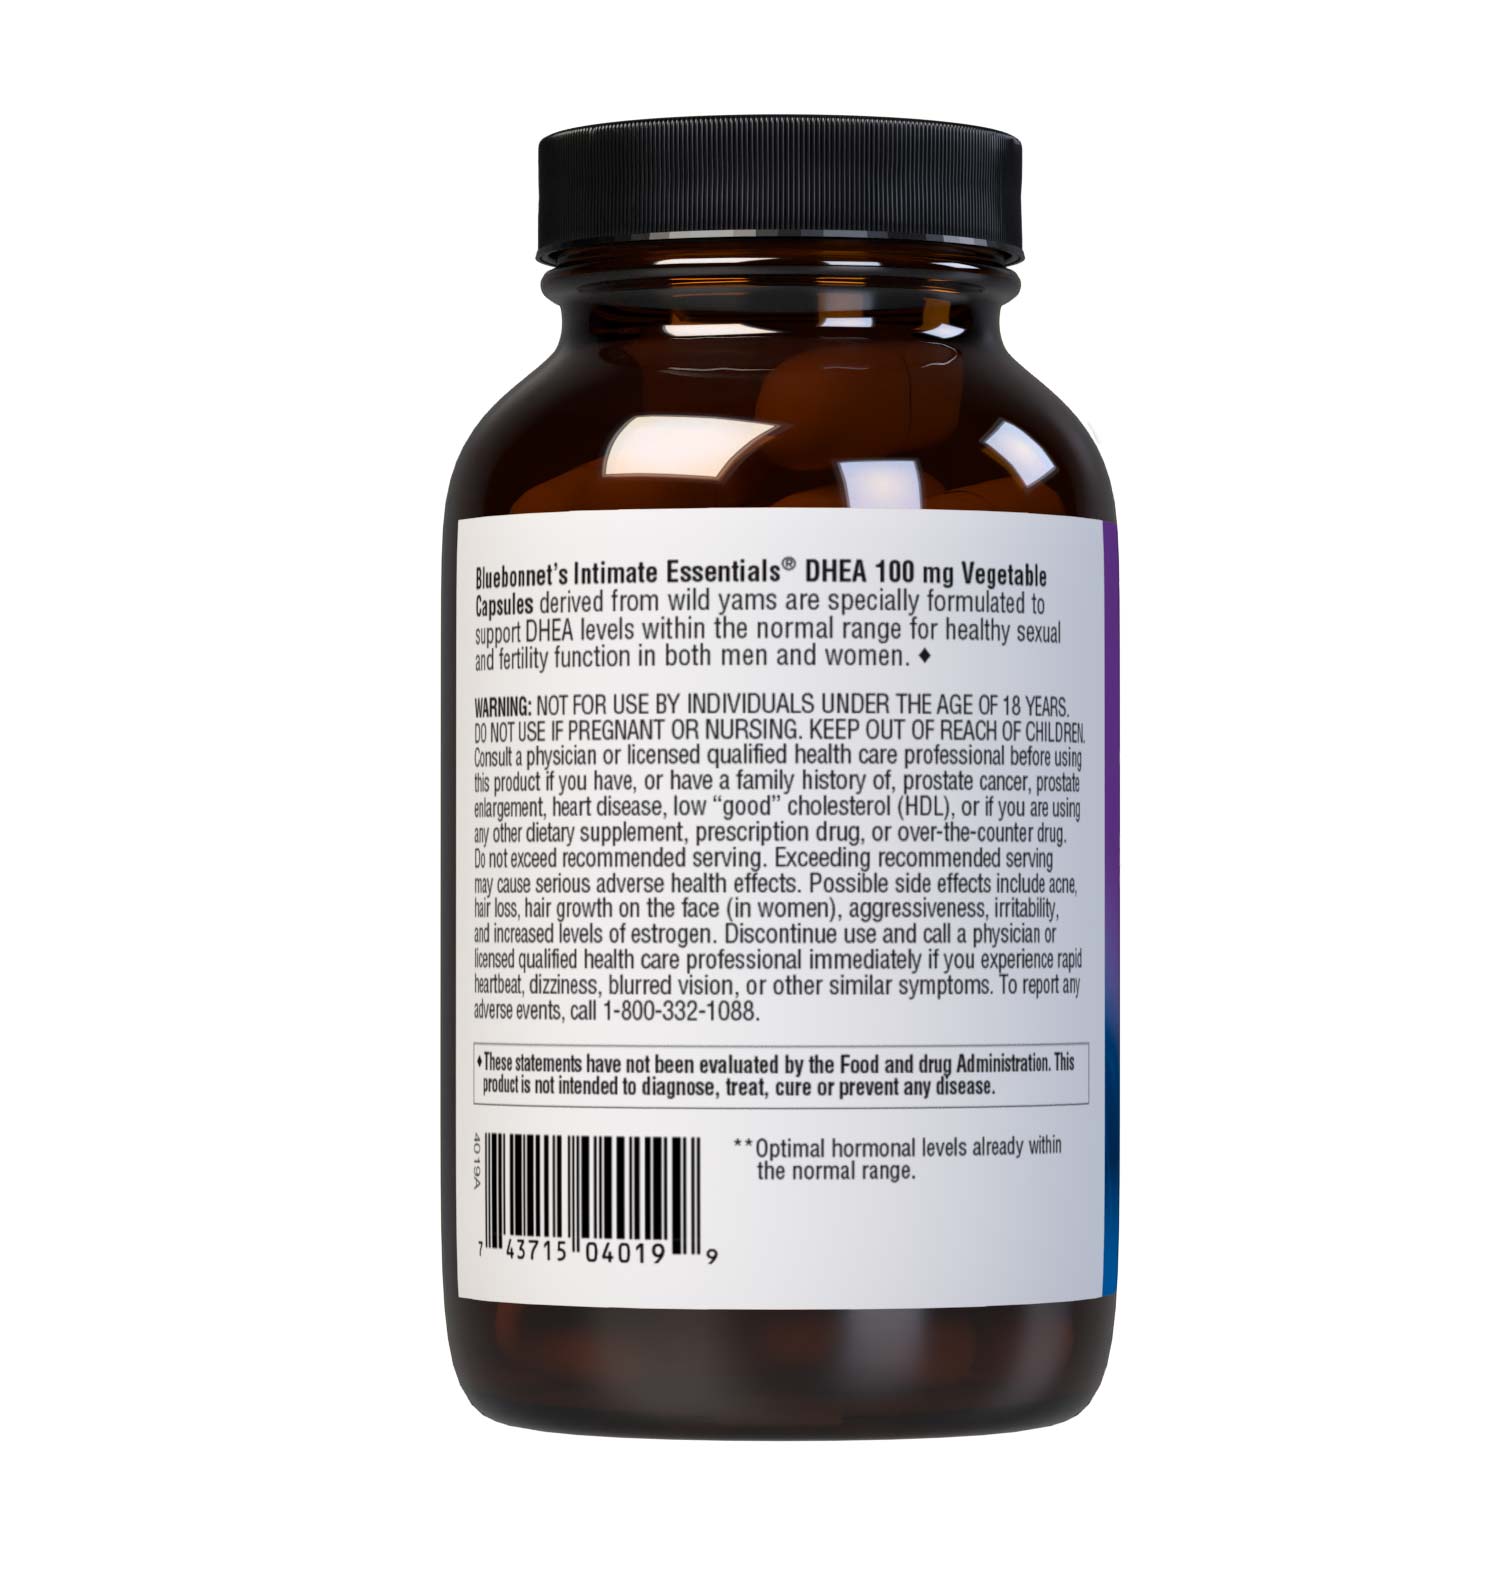 Bluebonnet’s Intimate Essentials DHEA 100 mg Vegetable Capsules derived from wild yams are specially formulated to support DHEA levels within the normal range for healthy sexual and fertility function in both men and women. Description panel. #size_60 count